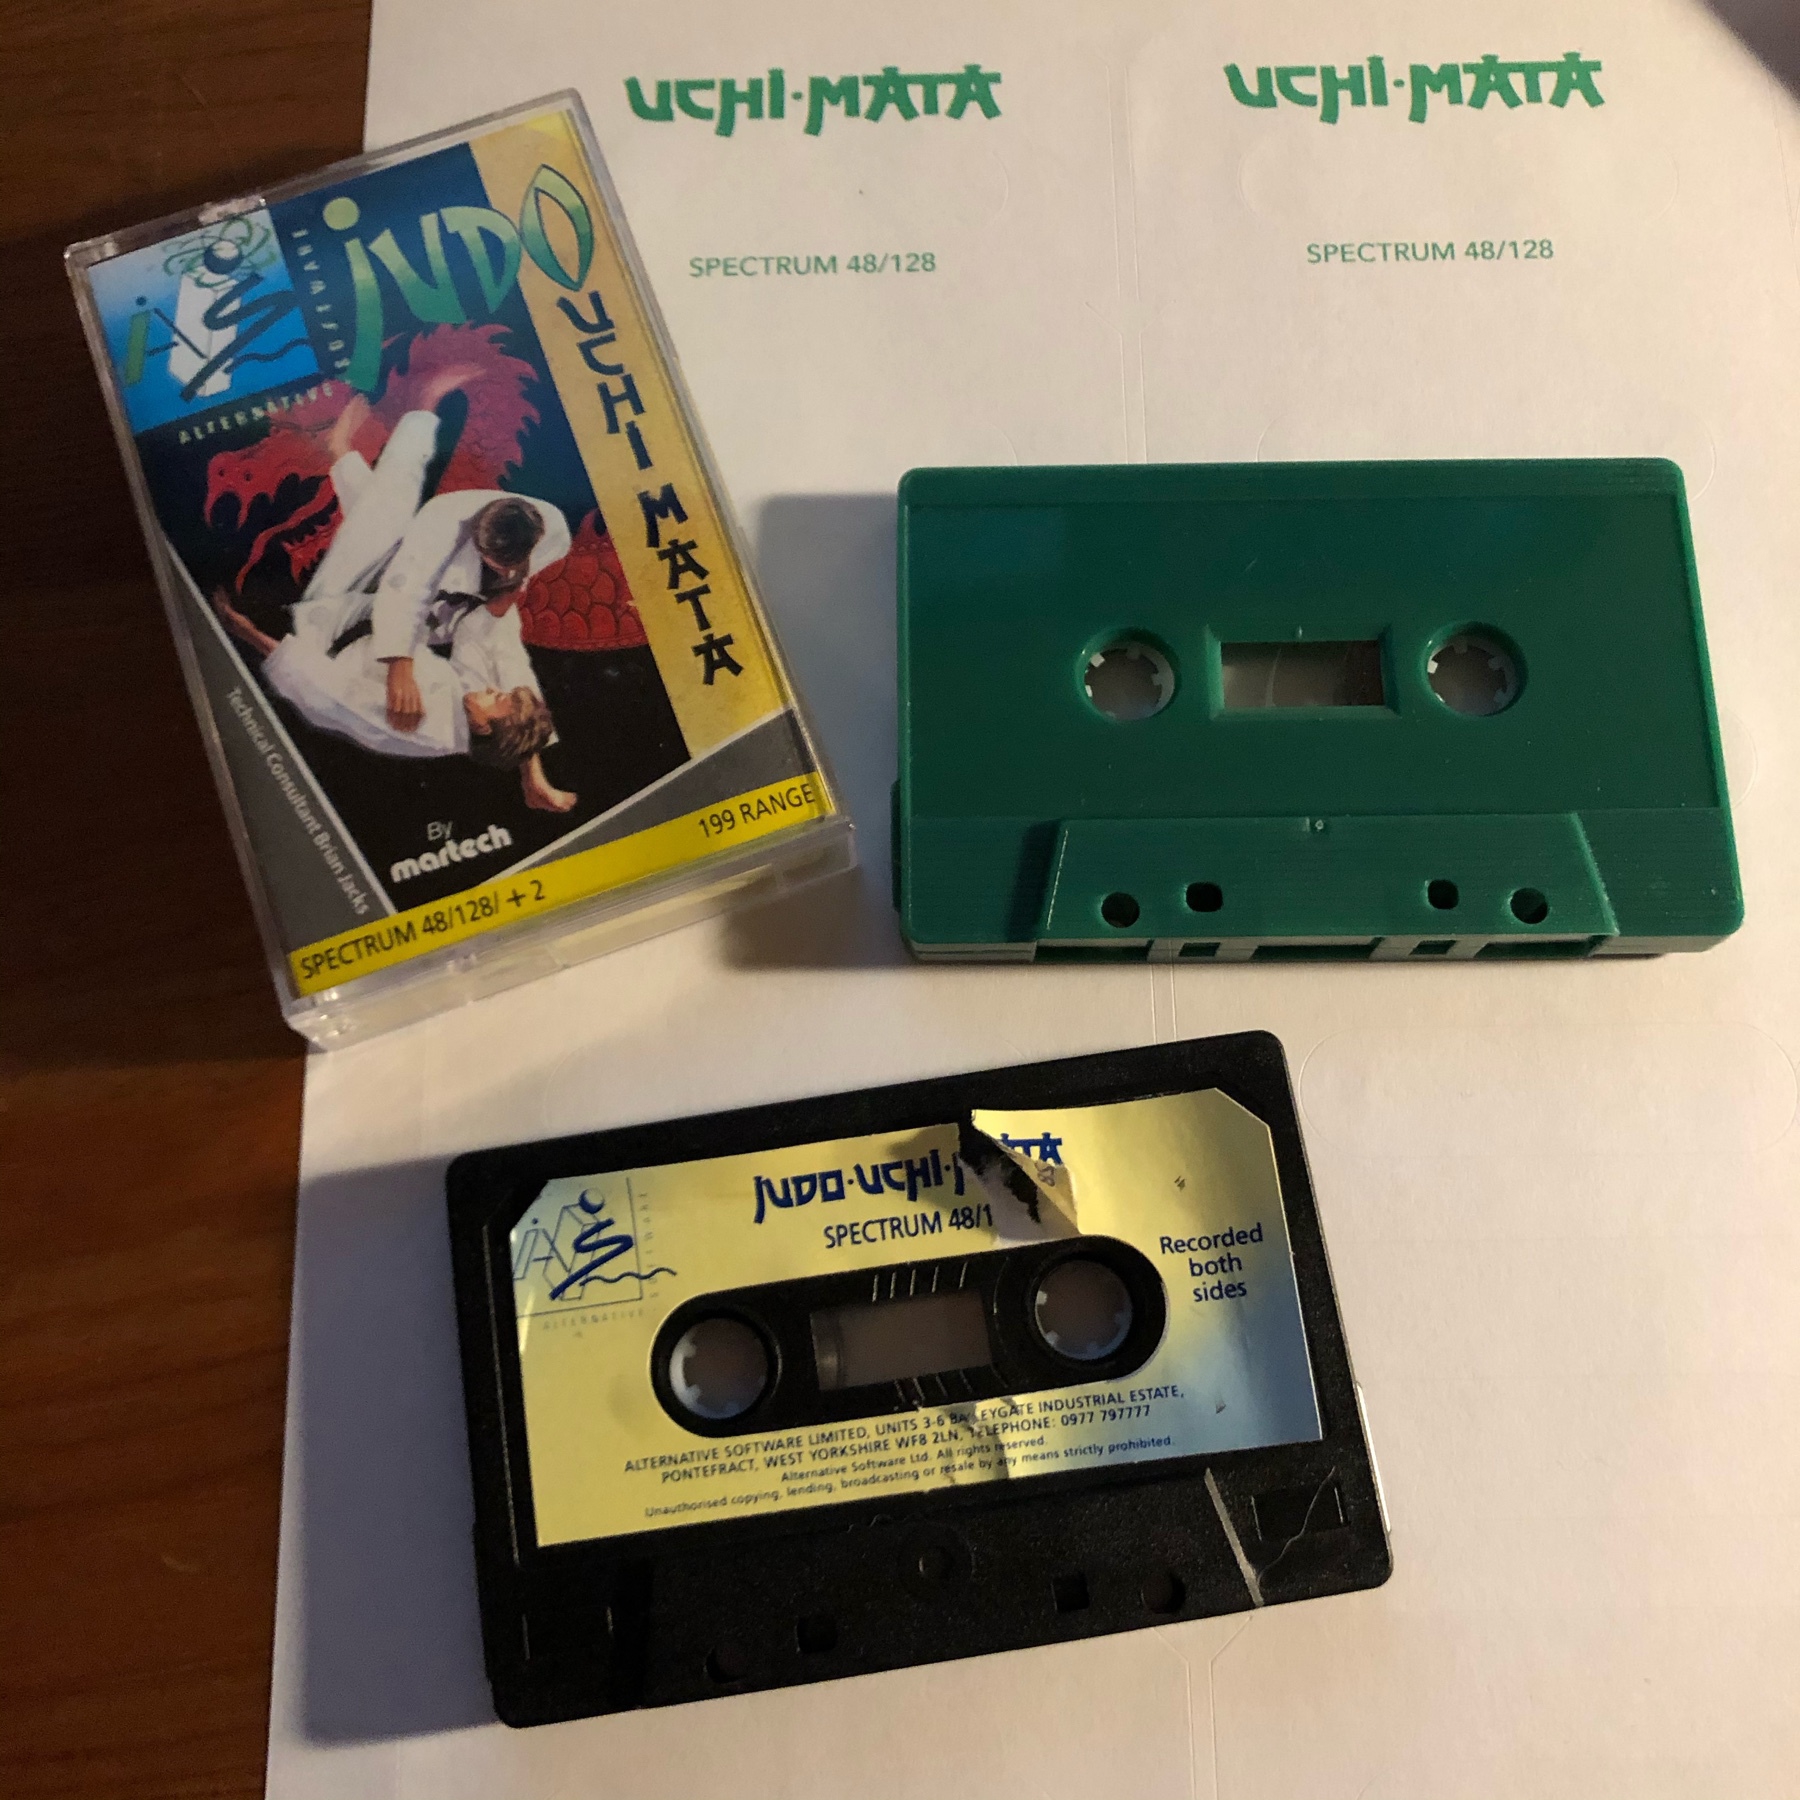 UCHI MATA JUDO game on cassette tape with a worn label, and a brand new green cassette with no label